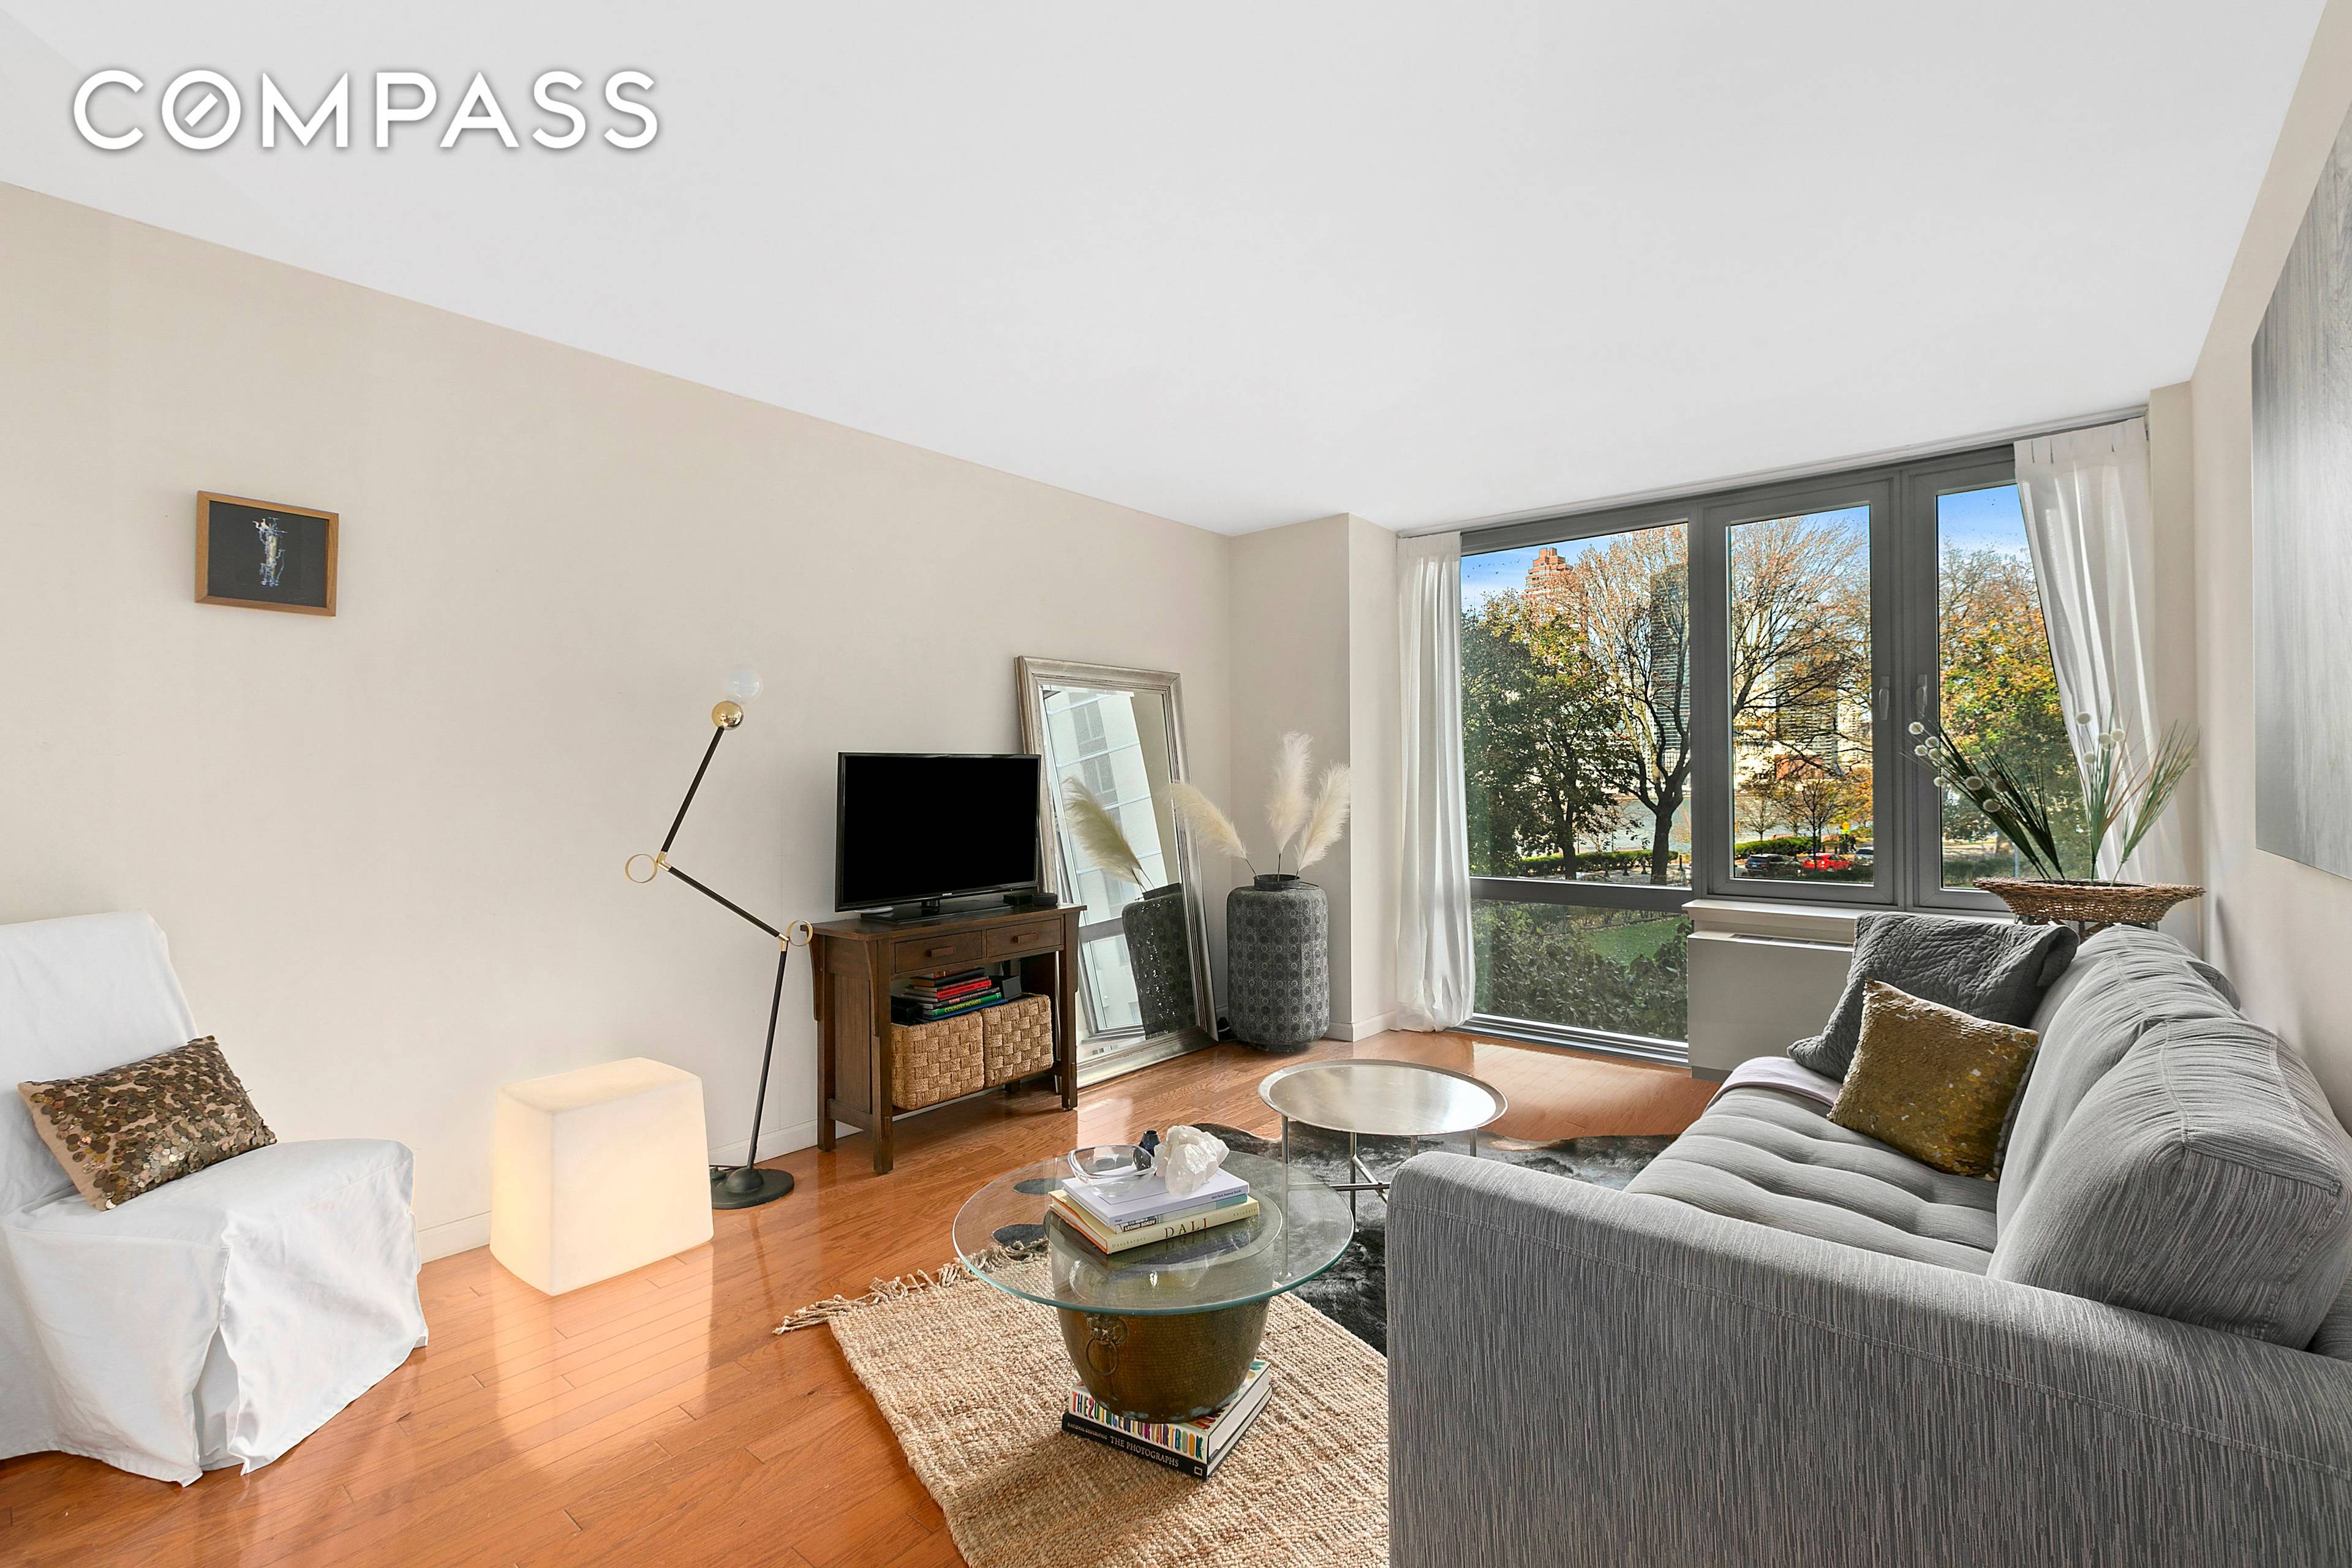 This unique North West facing 1 Bedroom home is featuring floor to ceiling windows, high end finishes, open modern kitchen with stainless steel appliances including a range, refrigerator, dishwasher, microwave, ...